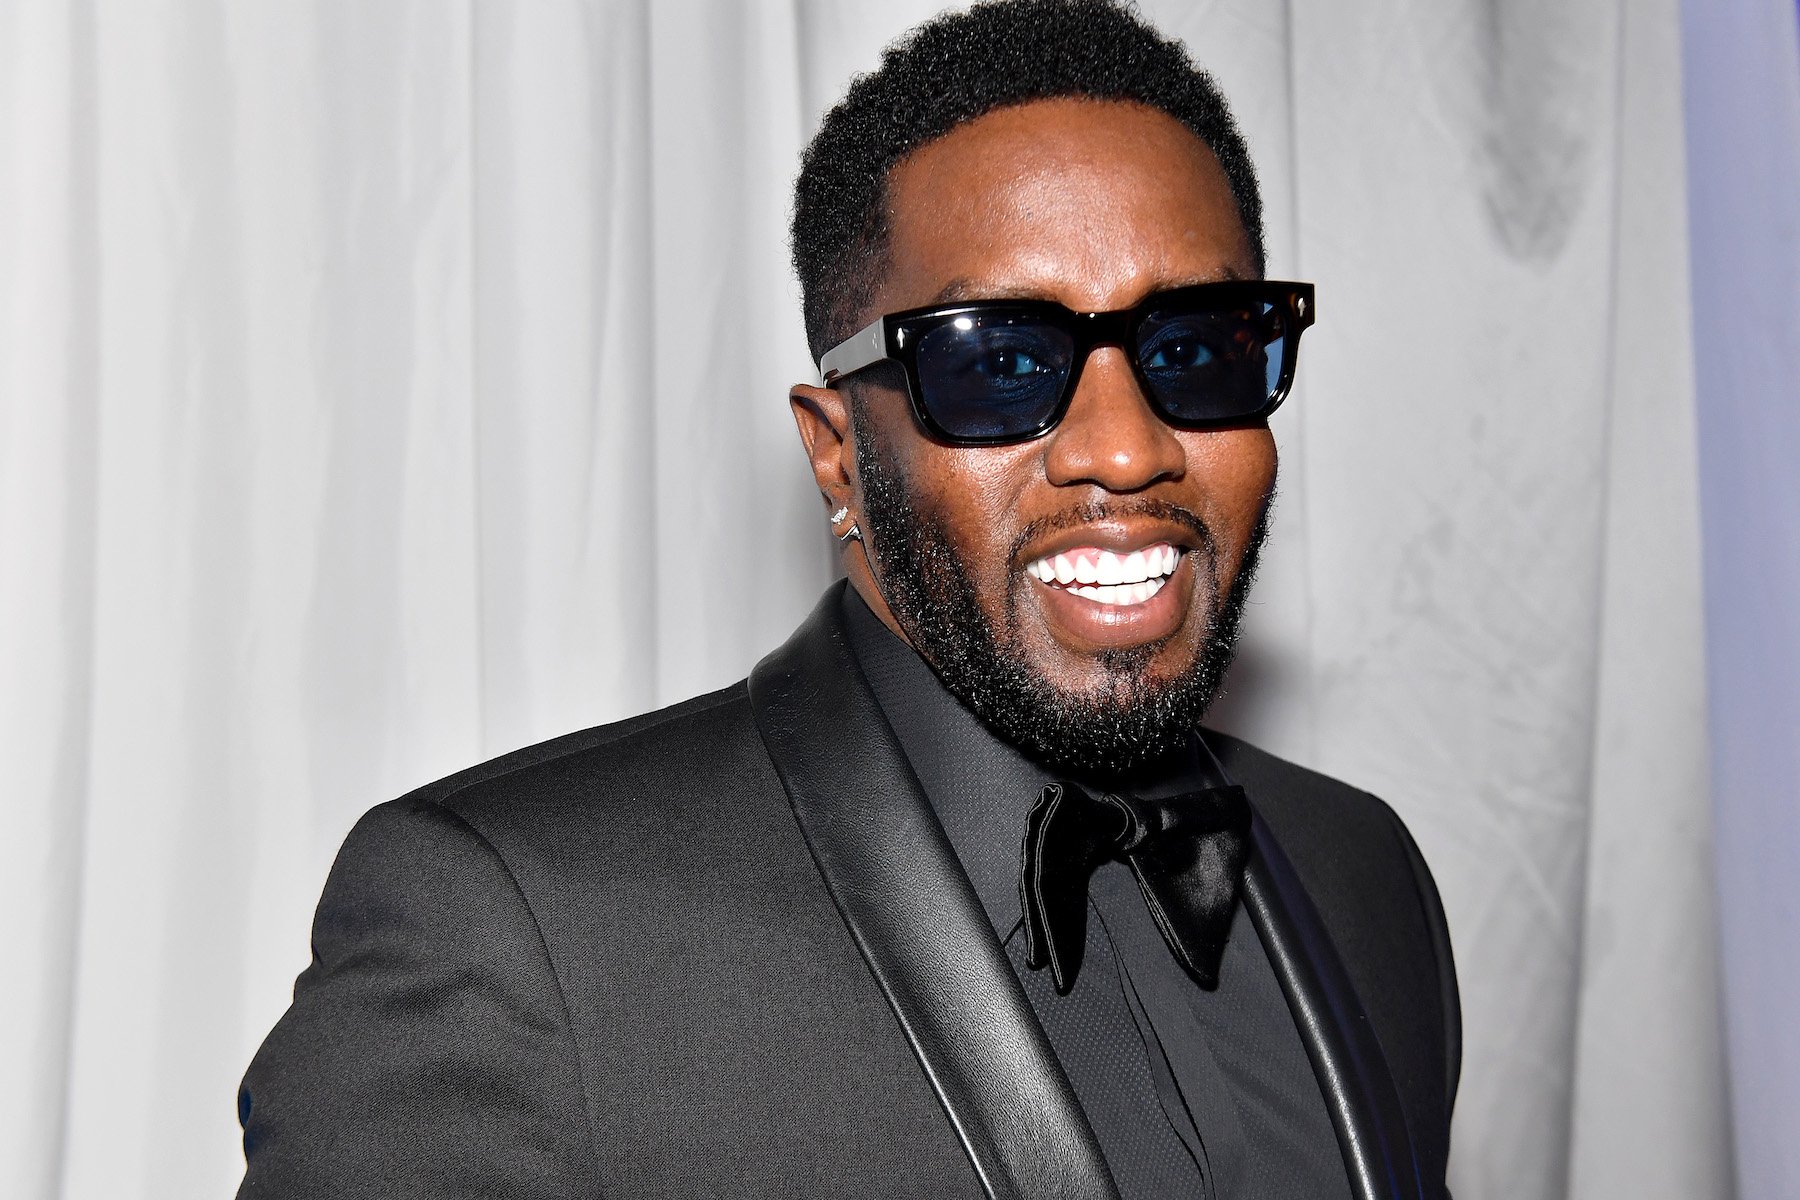 Sean "Diddy" Combs, who has certain thoughts about rap lyrics about women, wearing a black suit and smiling for a photo